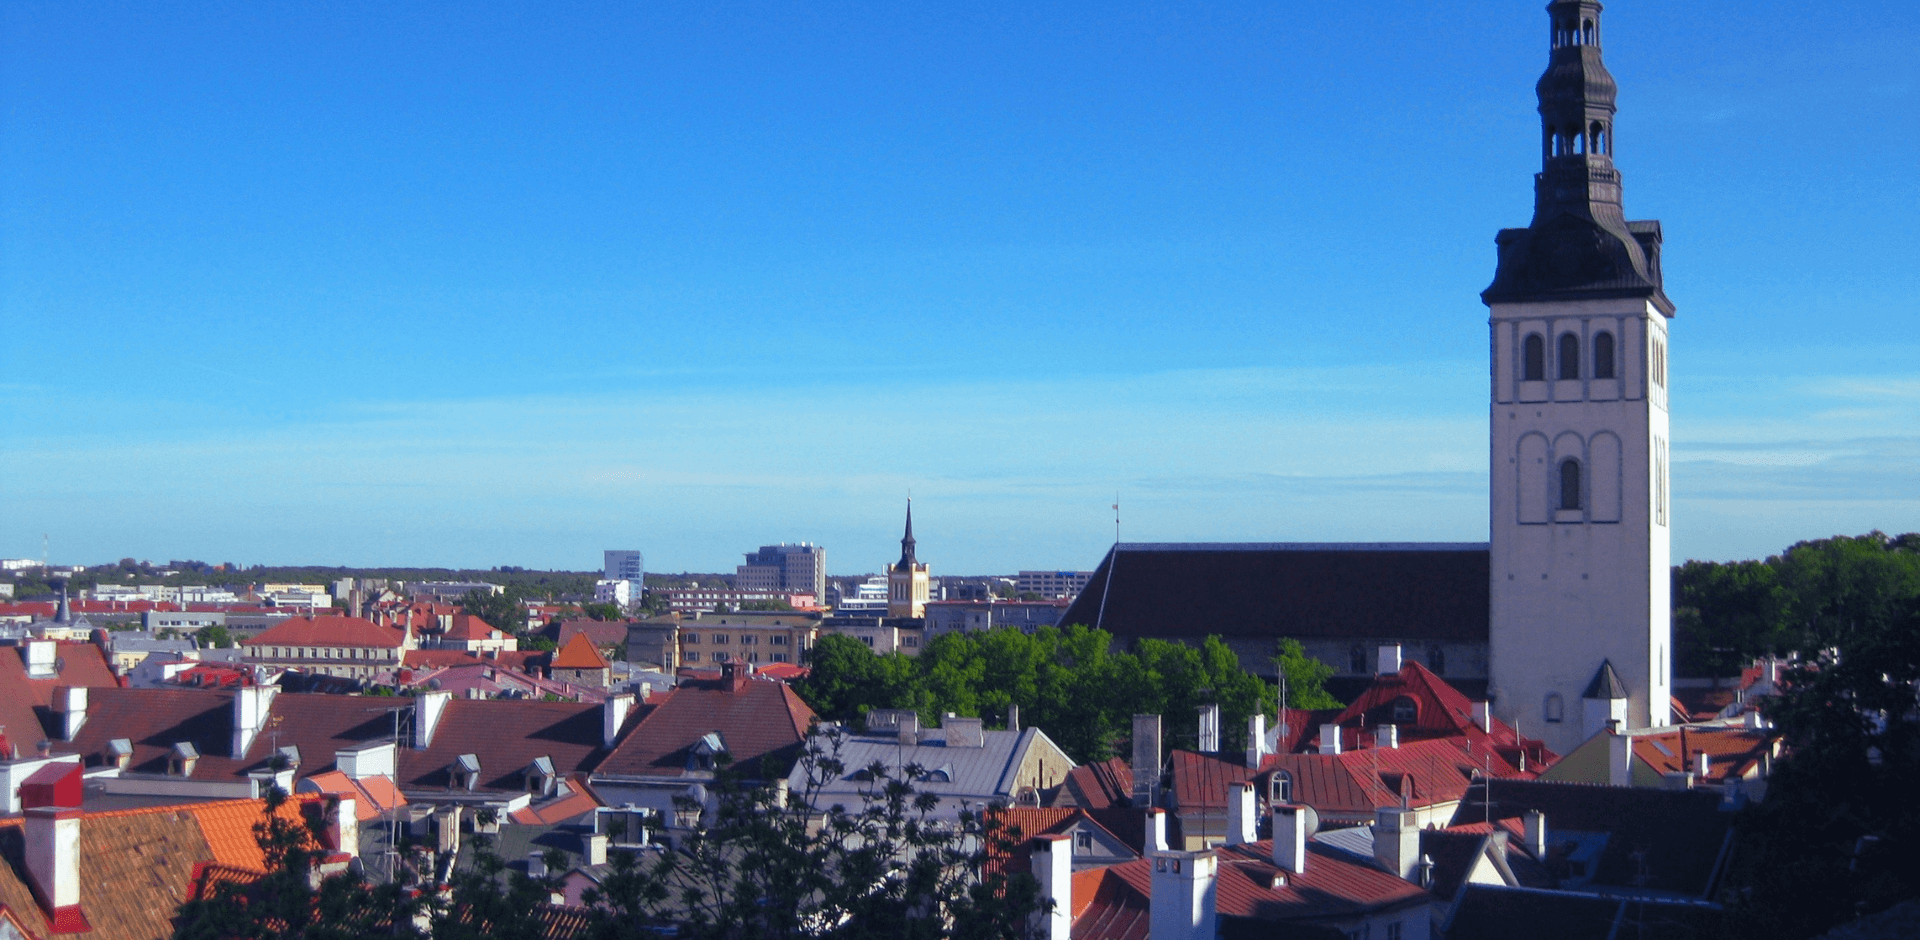 Alternative Investment Fund in Estonia for investing in crypto projects and crypto-assets